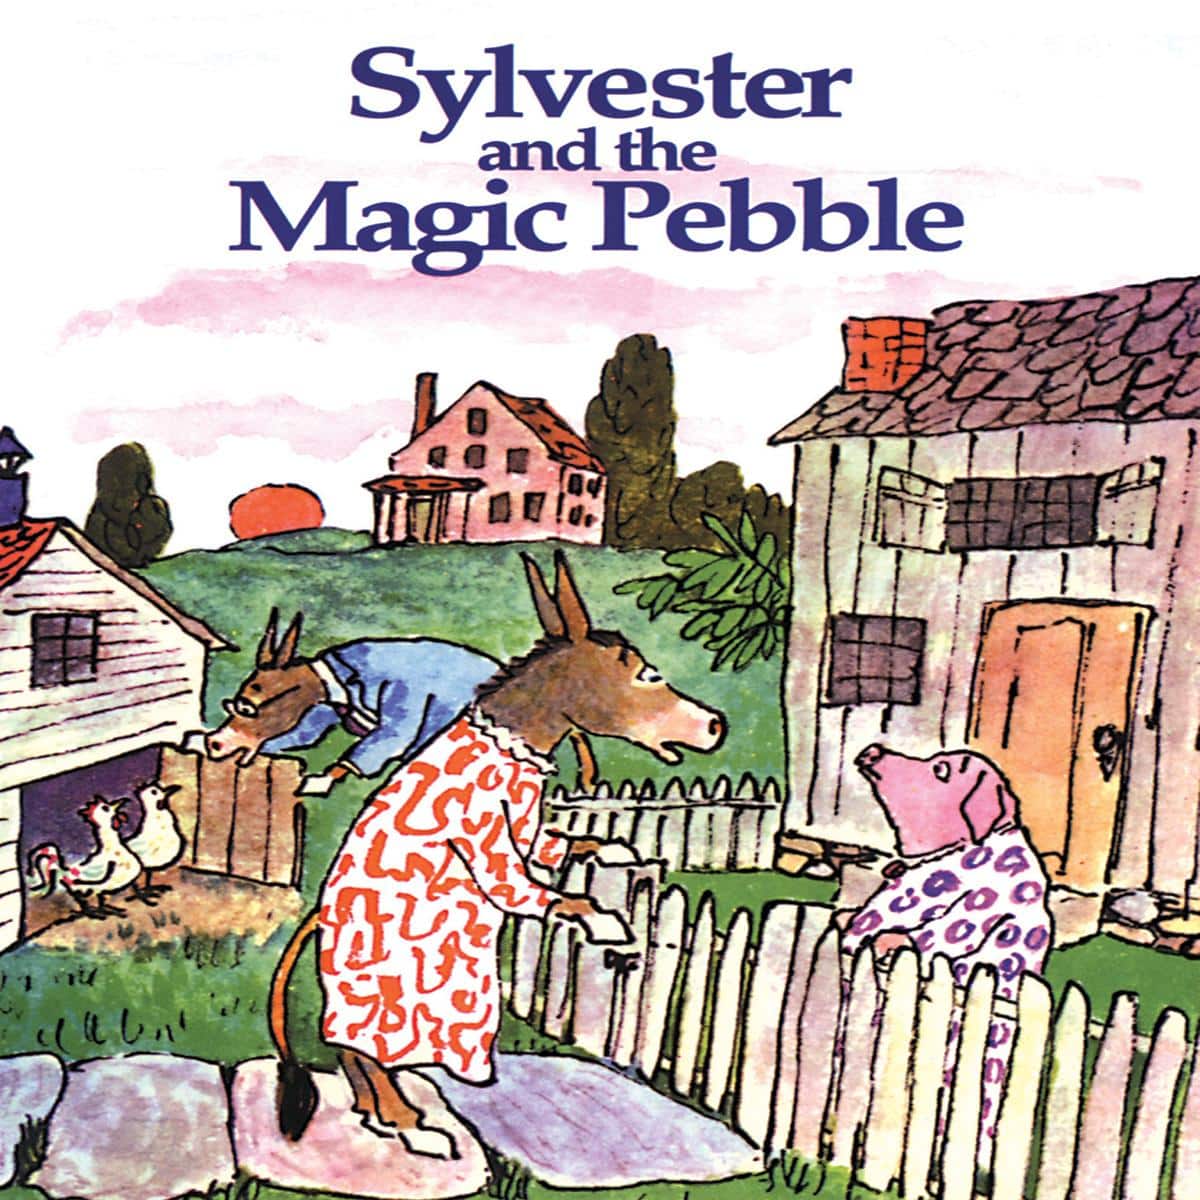 The cover for the book Sylvester and the Magic Pebble